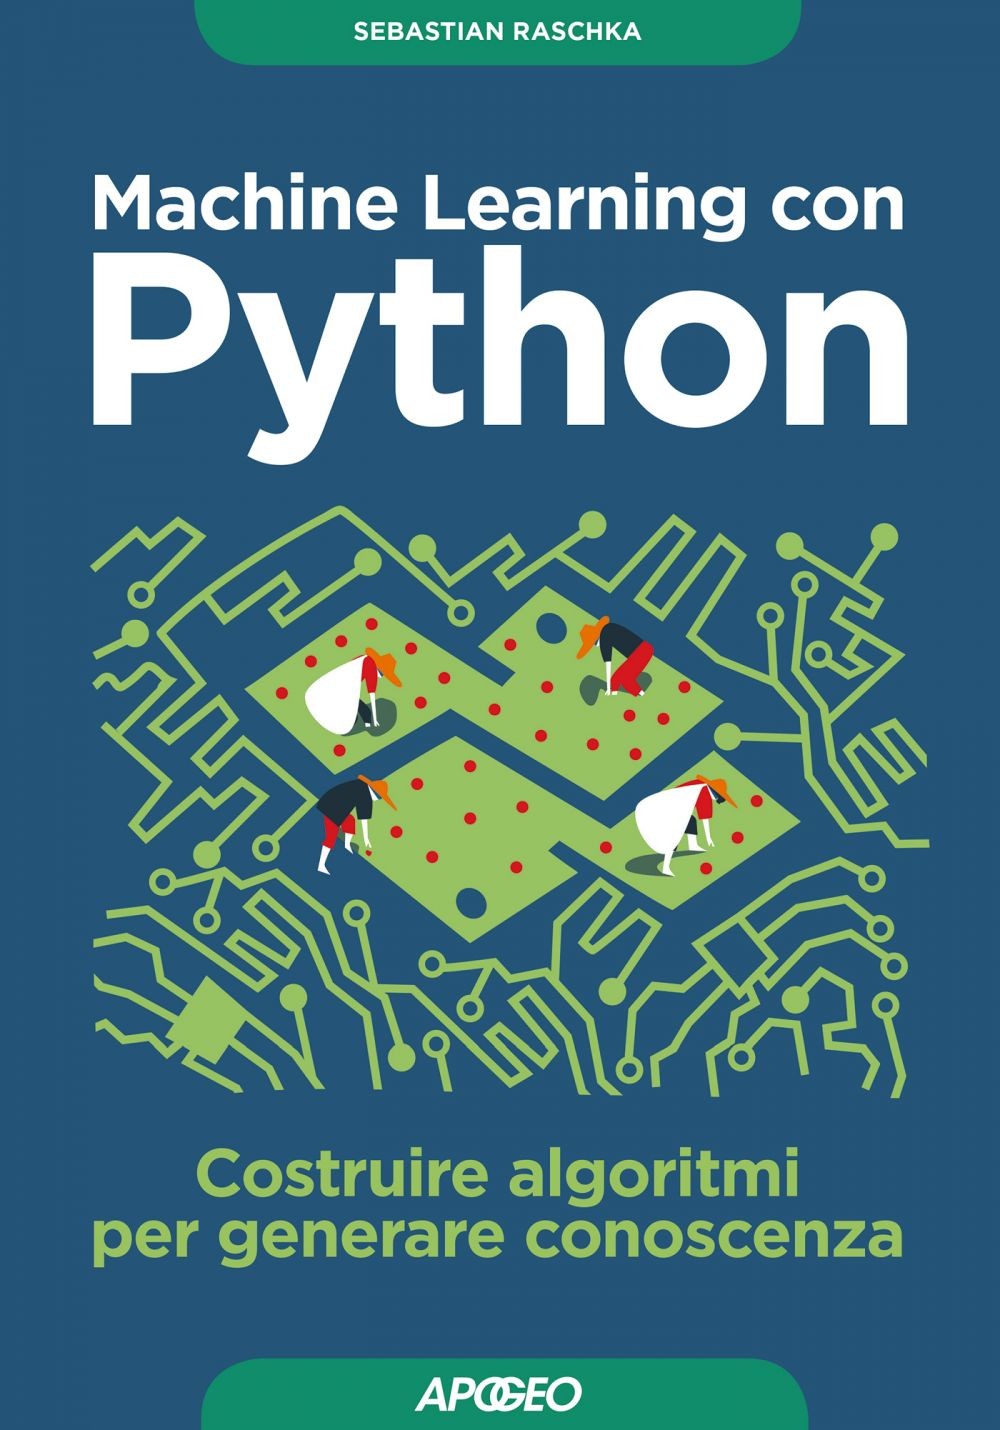 Machine Learning con Python - Librerie.coop